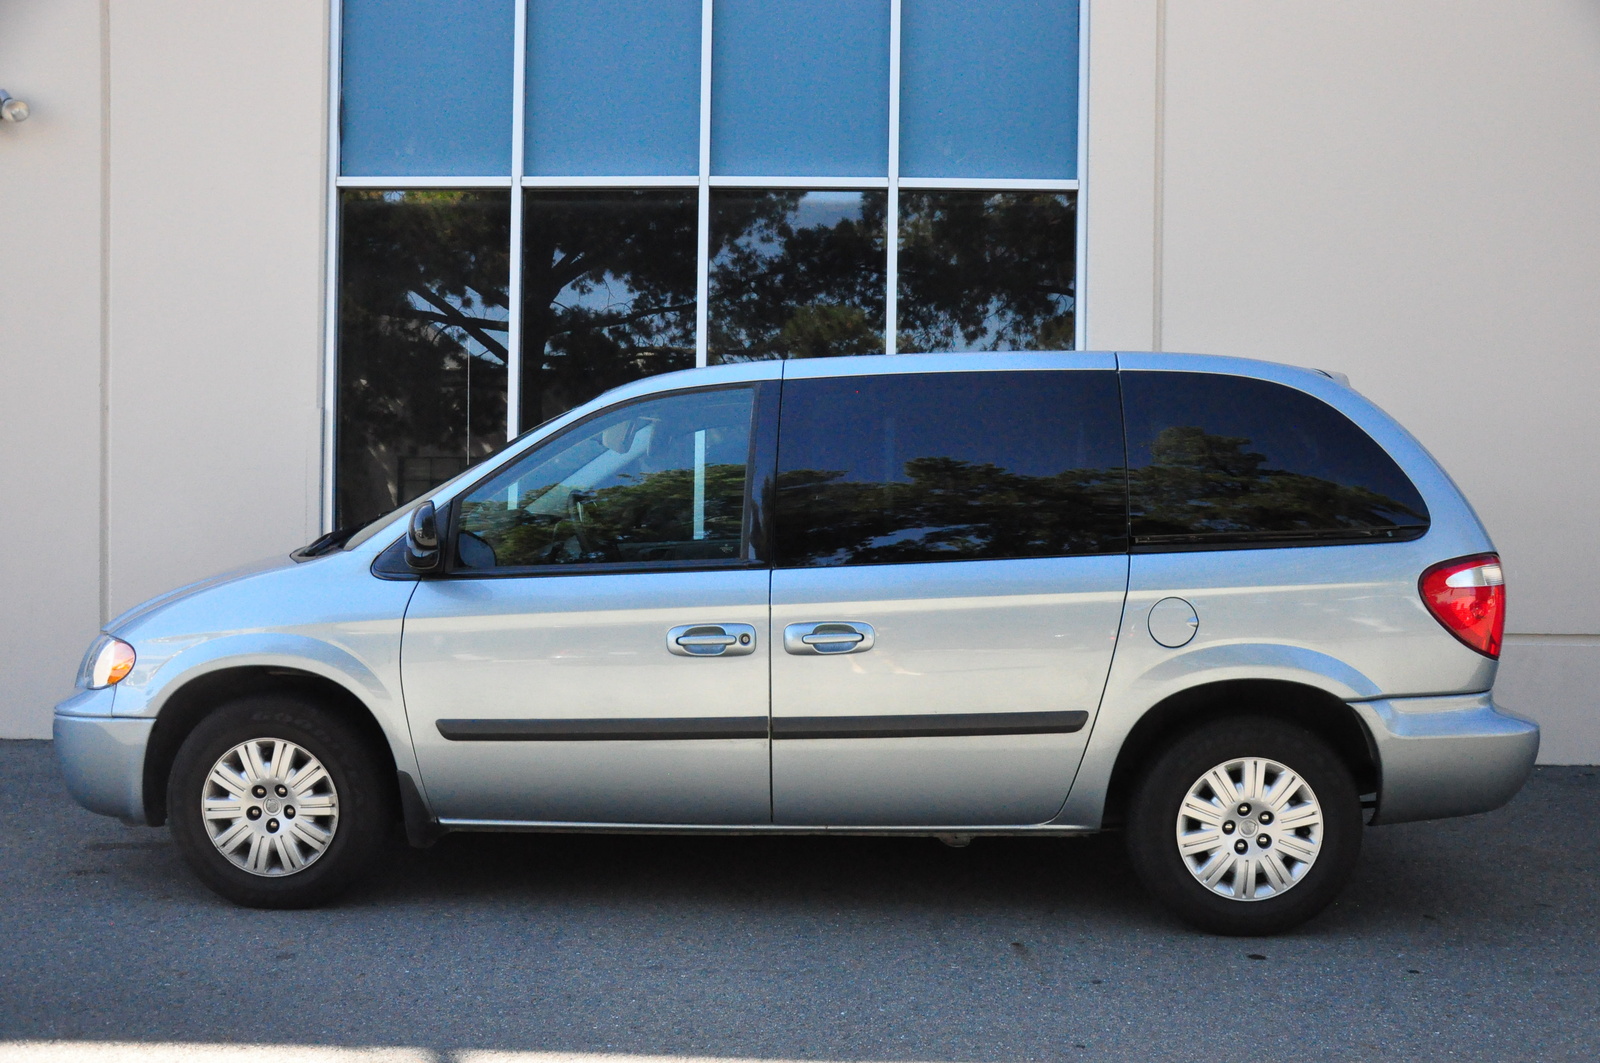 2005 Chrysler town and country touring edition specs #4